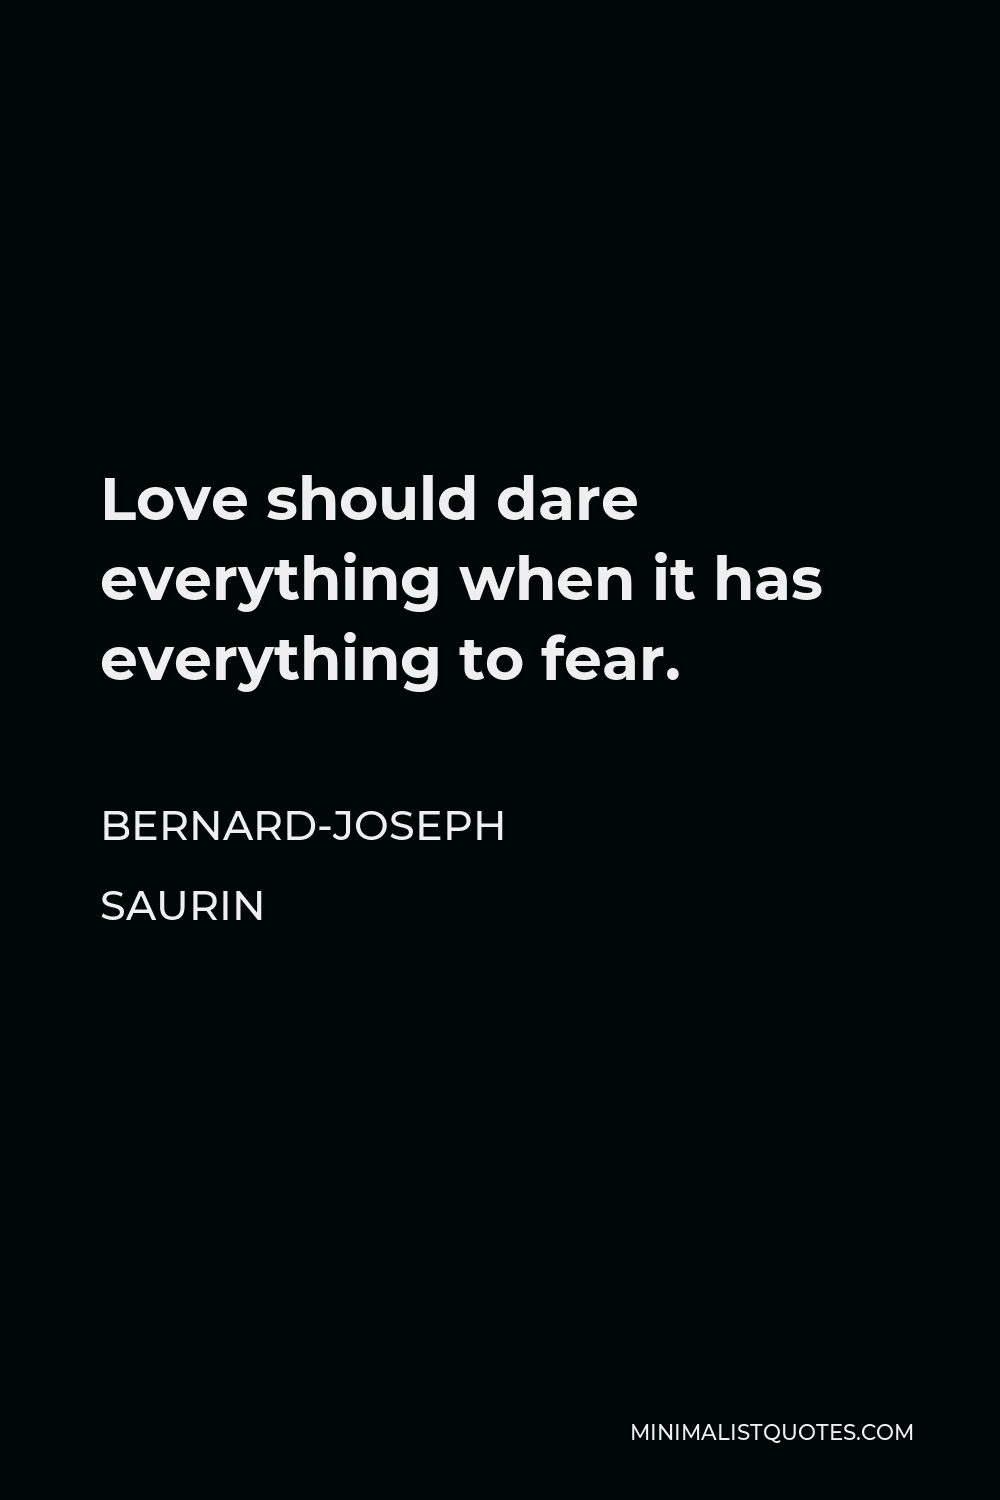 Bernard-Joseph Saurin Quote - Love should dare everything when it has everything to fear.